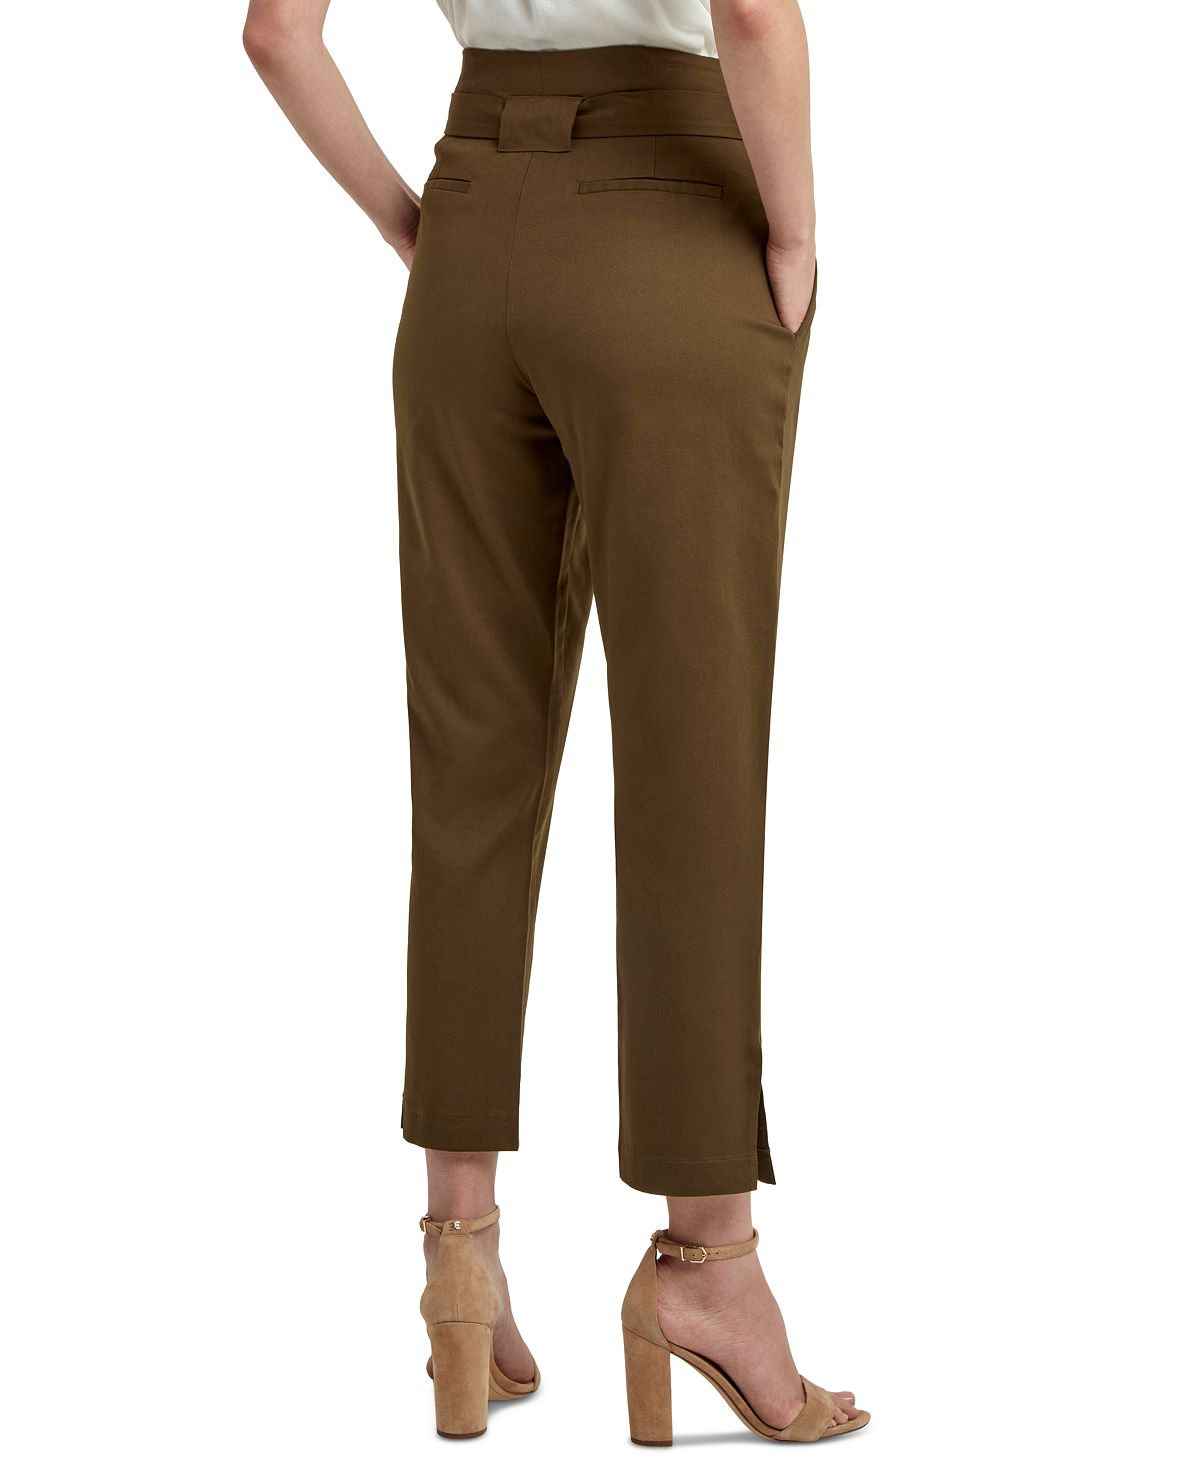 H by Halston Stretch Dress Pants for Women